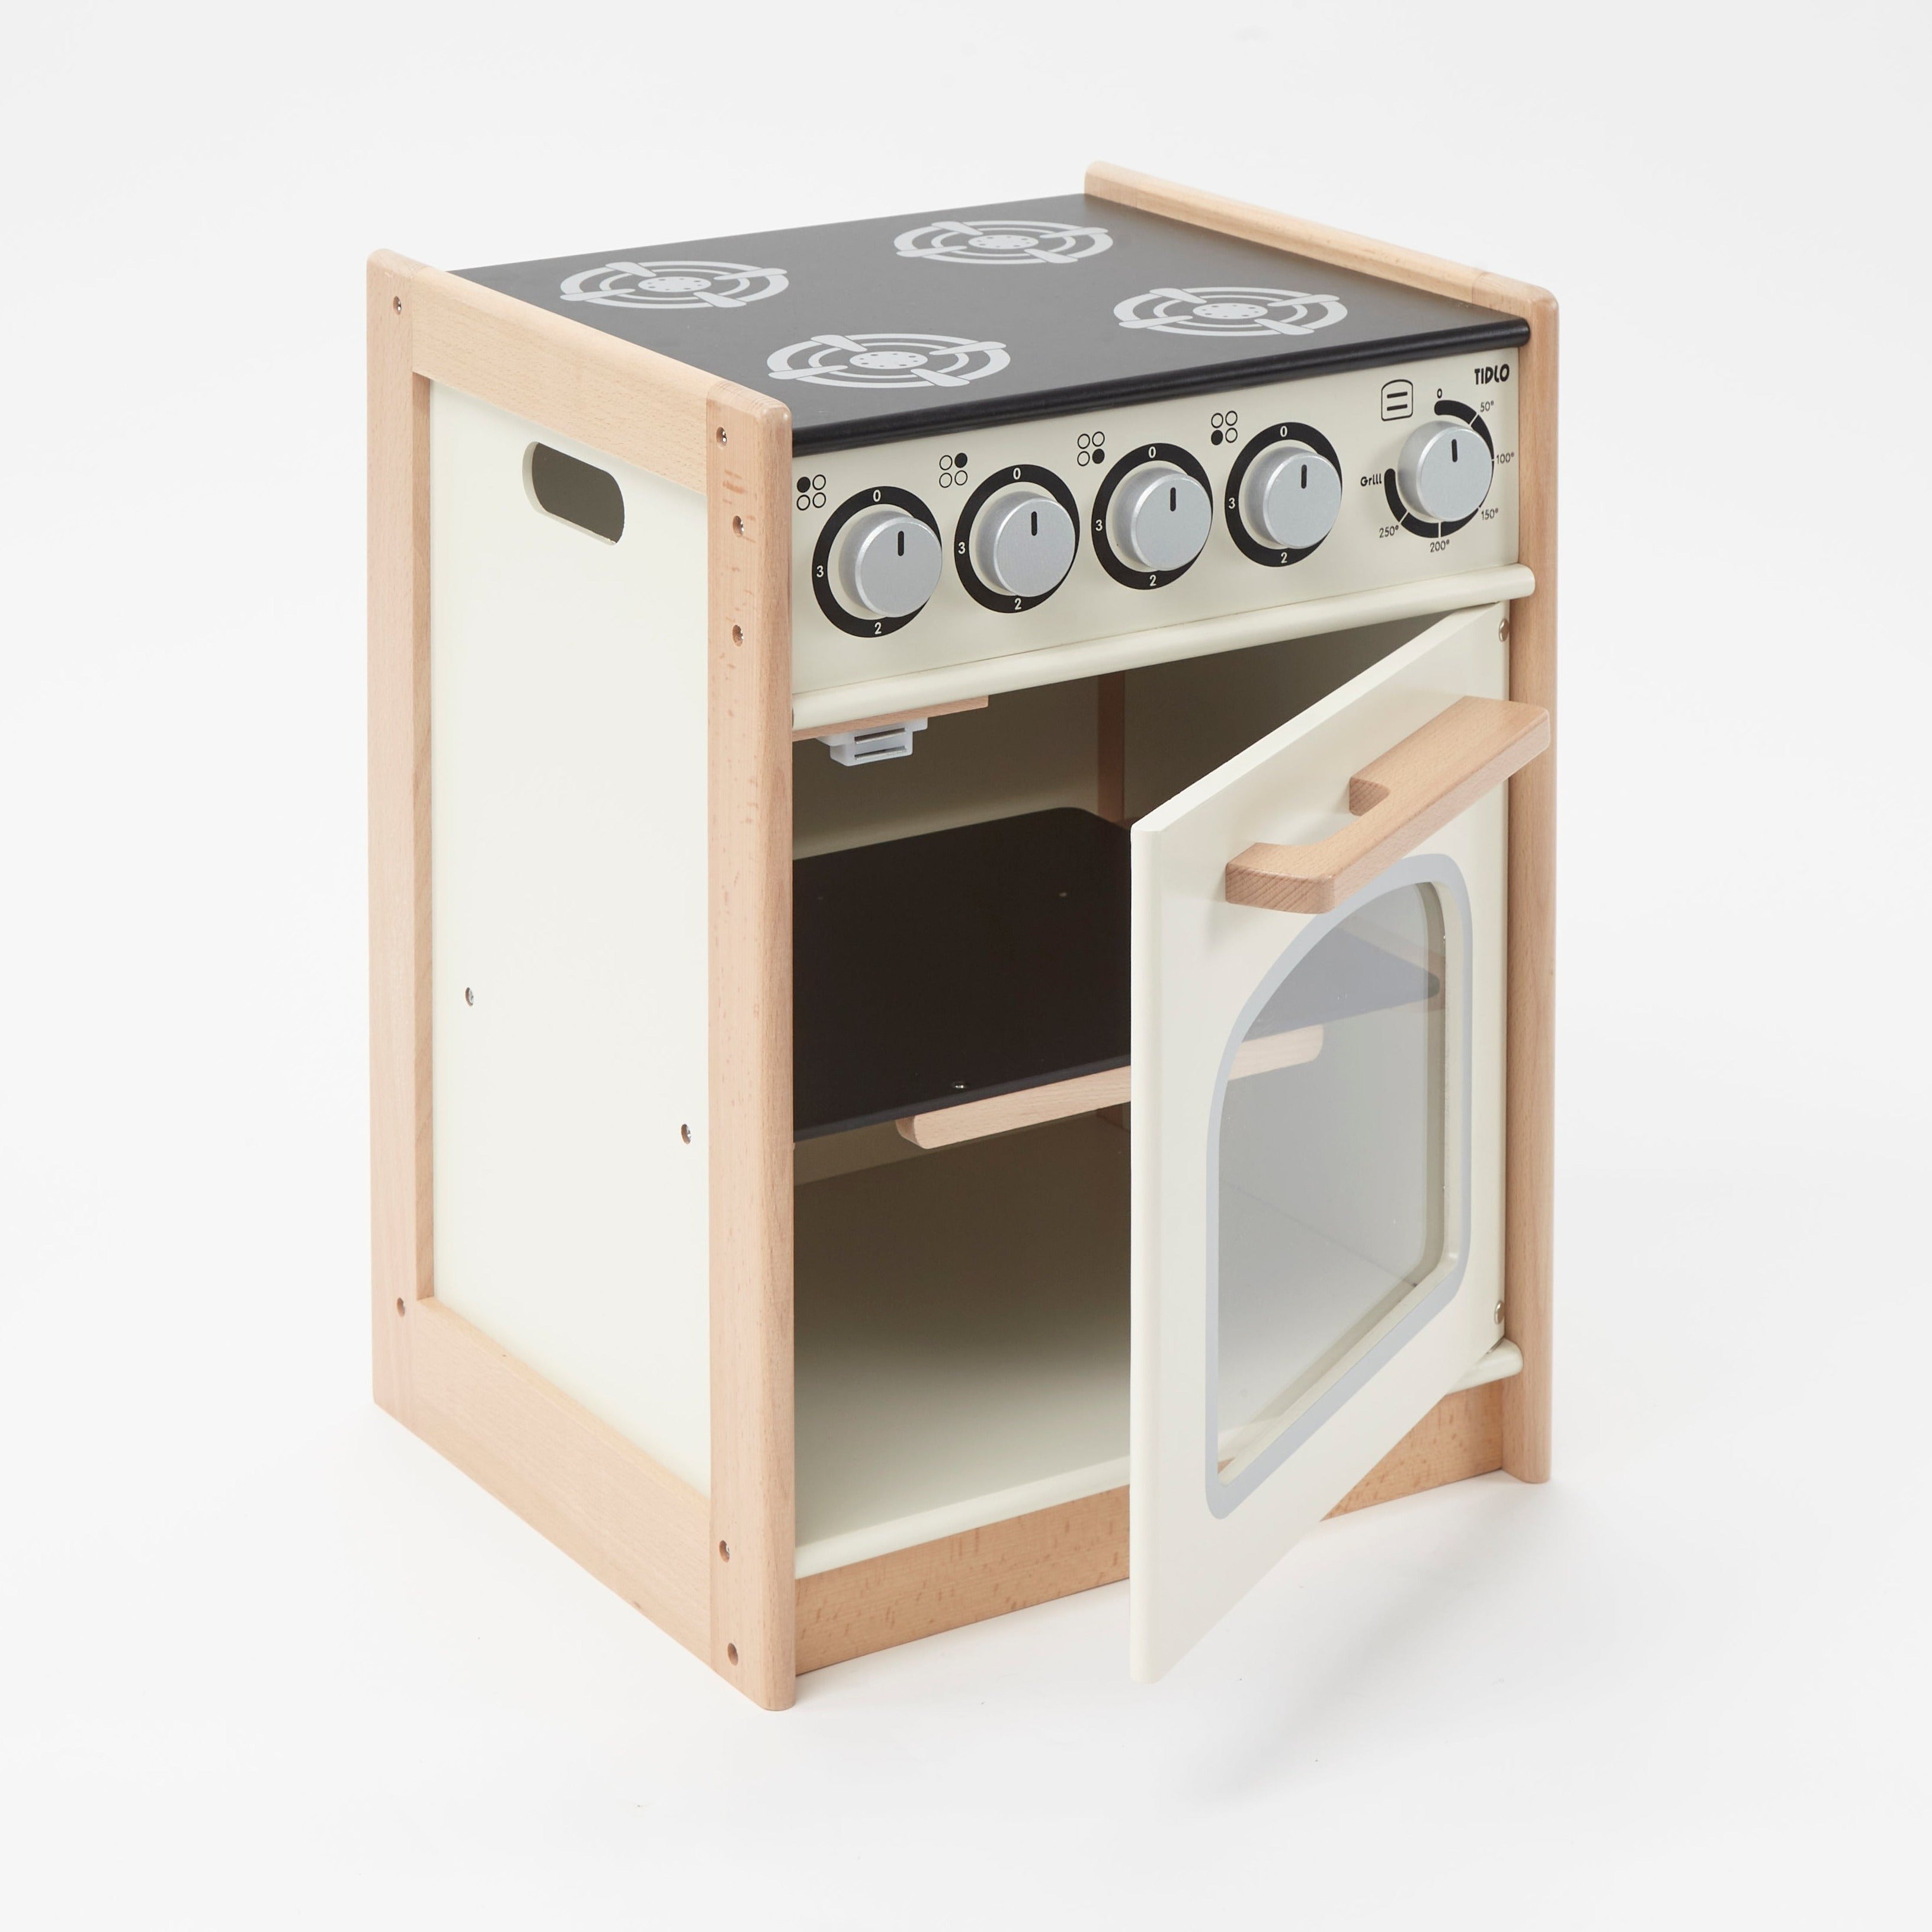 Pretend Play Wooden Cooker, Budding young chefs can cook up a storm with this sturdy wooden Cooker from Tidlo. With clicking dials, hob detailing and a removable oven tray, this cooker is a great addition to any pretend play kitchen. It even has a view hole in the door so little ones can keep an eye on their food to make sure that it doesn't burn! A great way to teach children about kitchen safety and how we cook different foods. Features carry handles. Encourages creative and imaginative role play. Combine